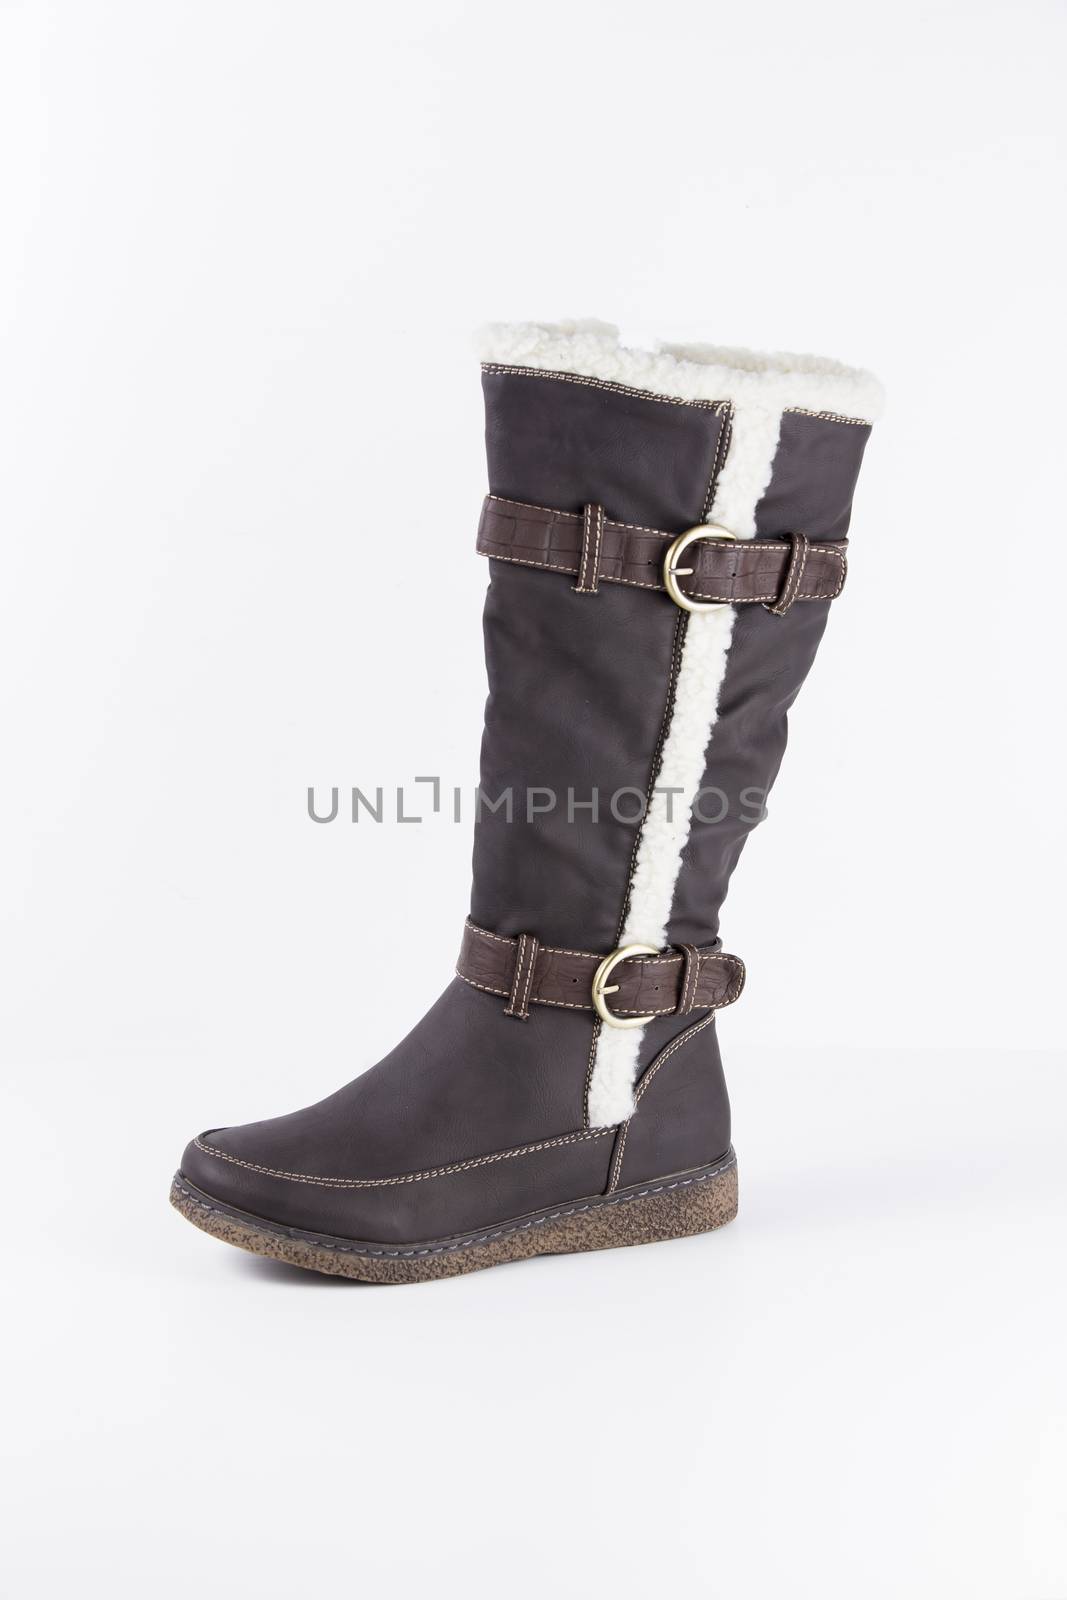 Brown leather boots on white background, isolated product.